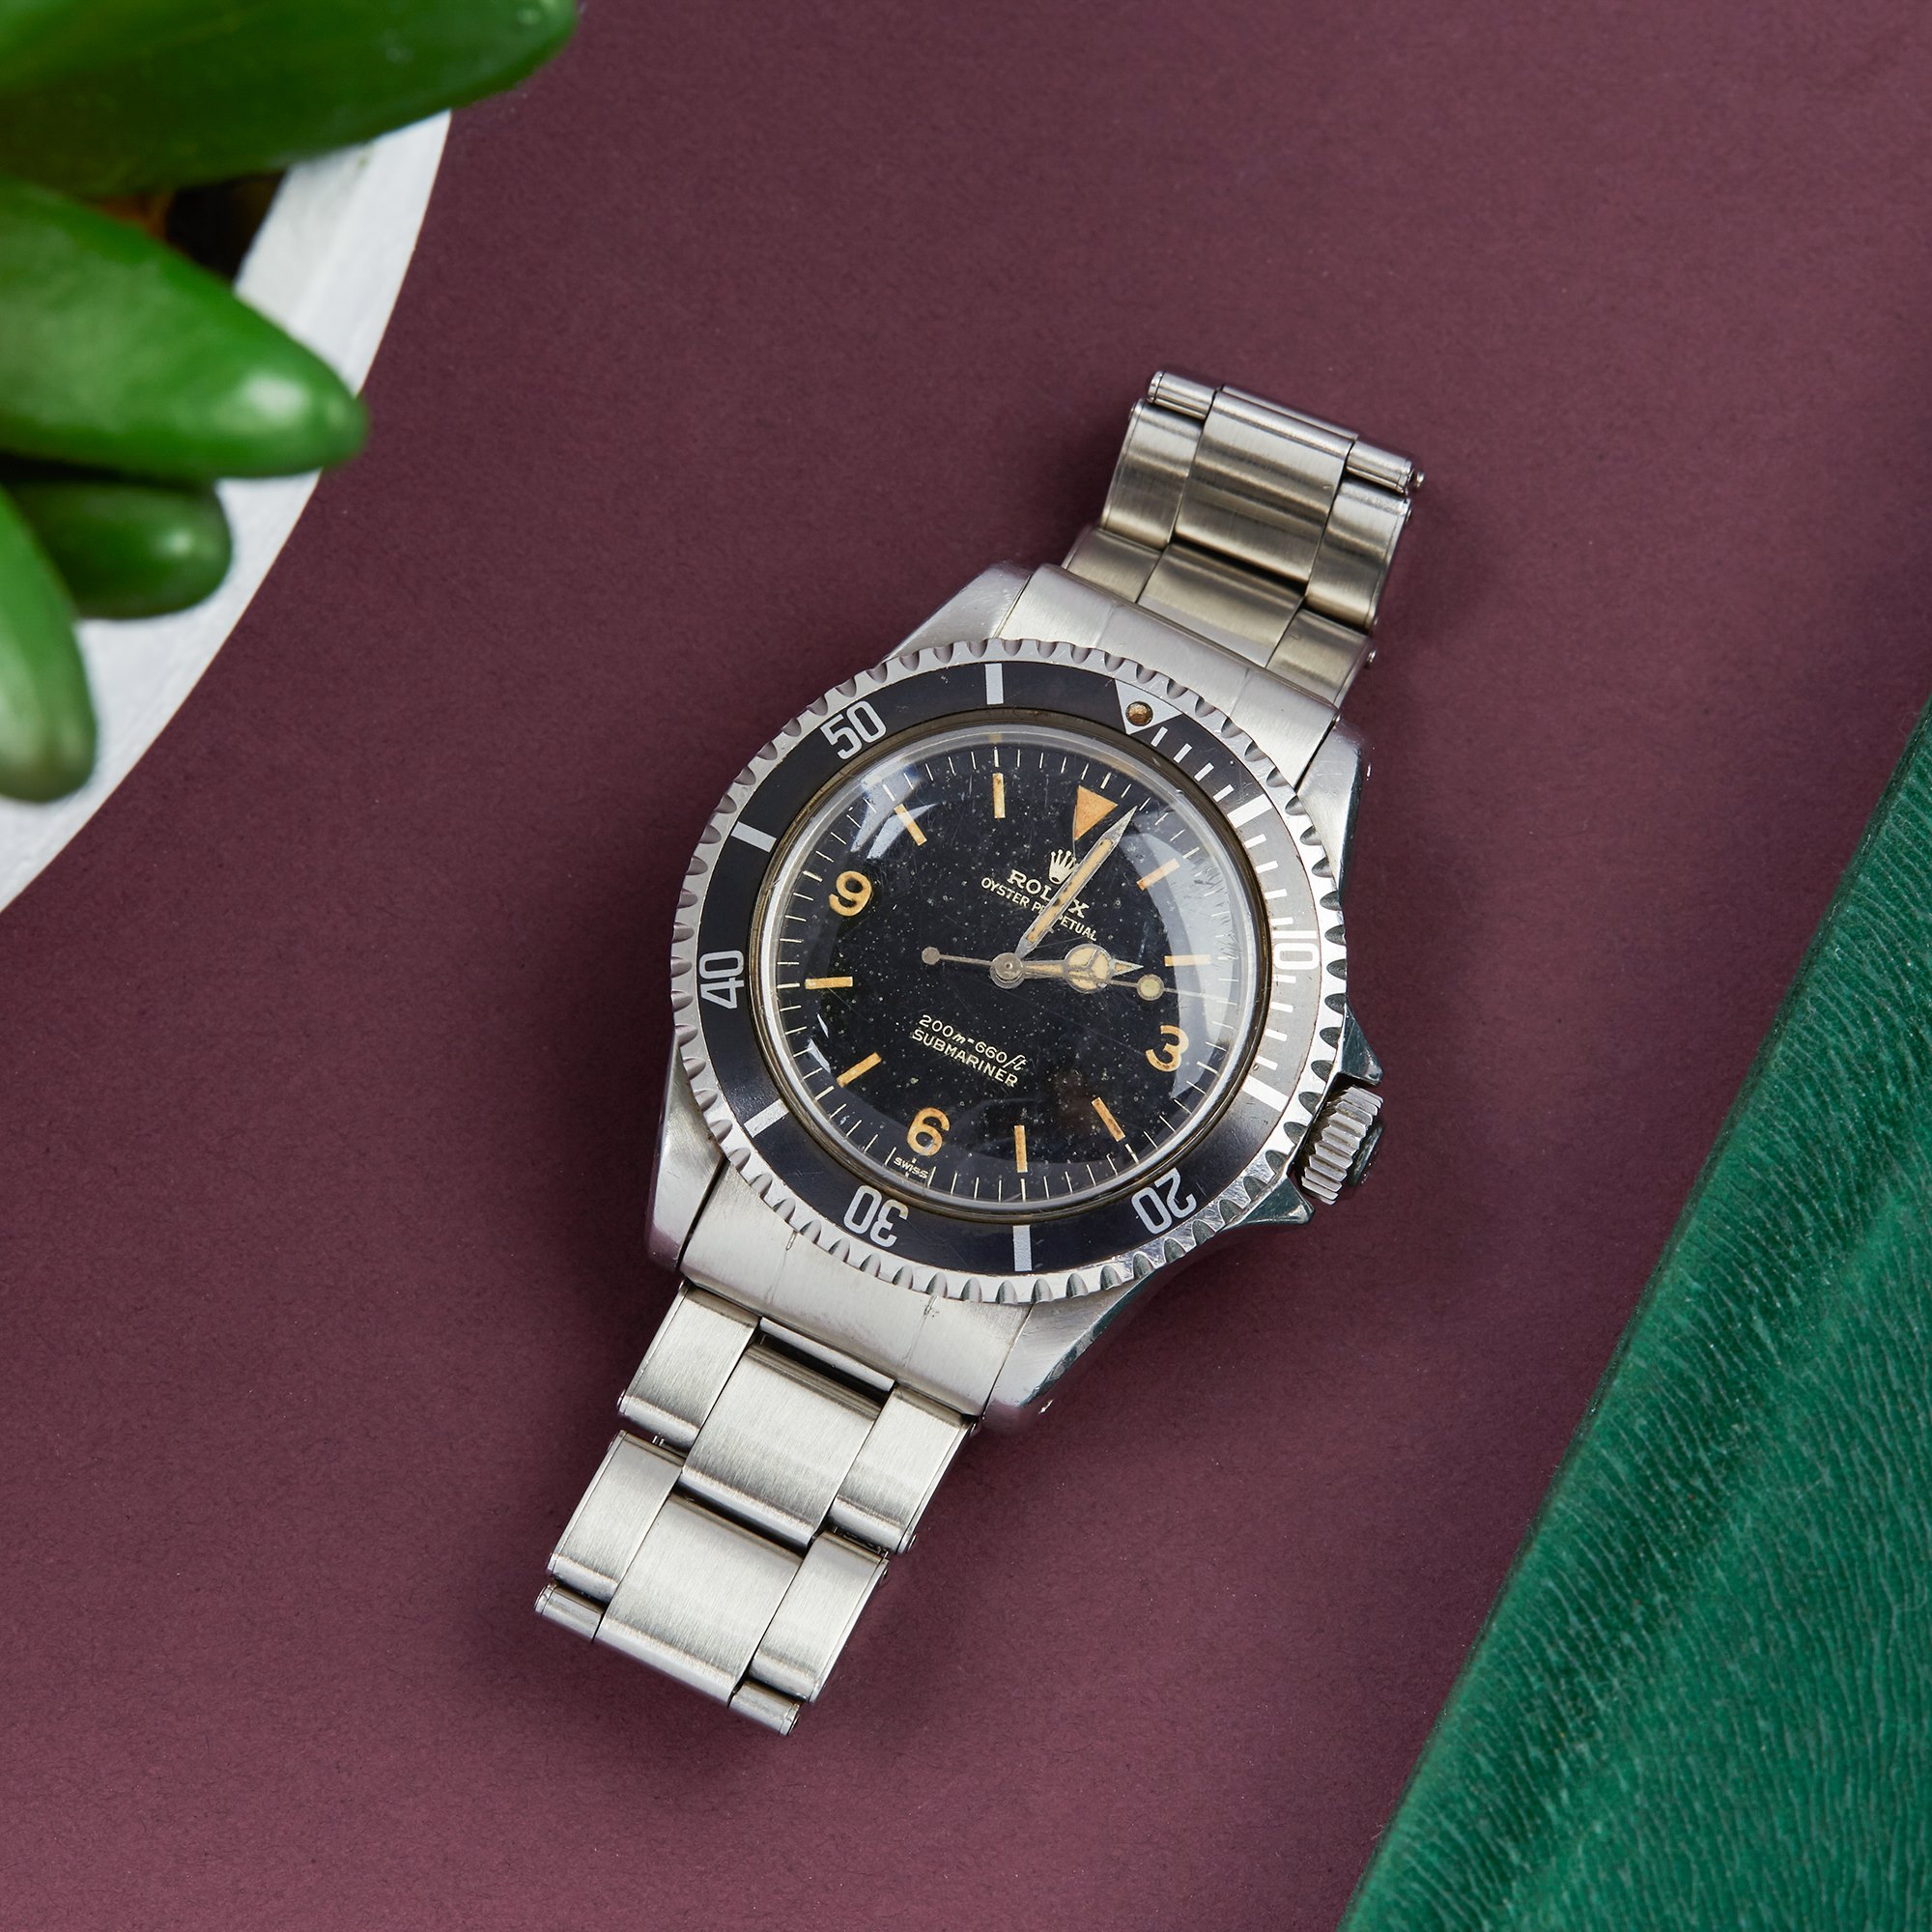 Rolex Submariner Gilt Explorer "Kissing L" Dial Stainless Steel - 5513 Roestvrij Staal 5513